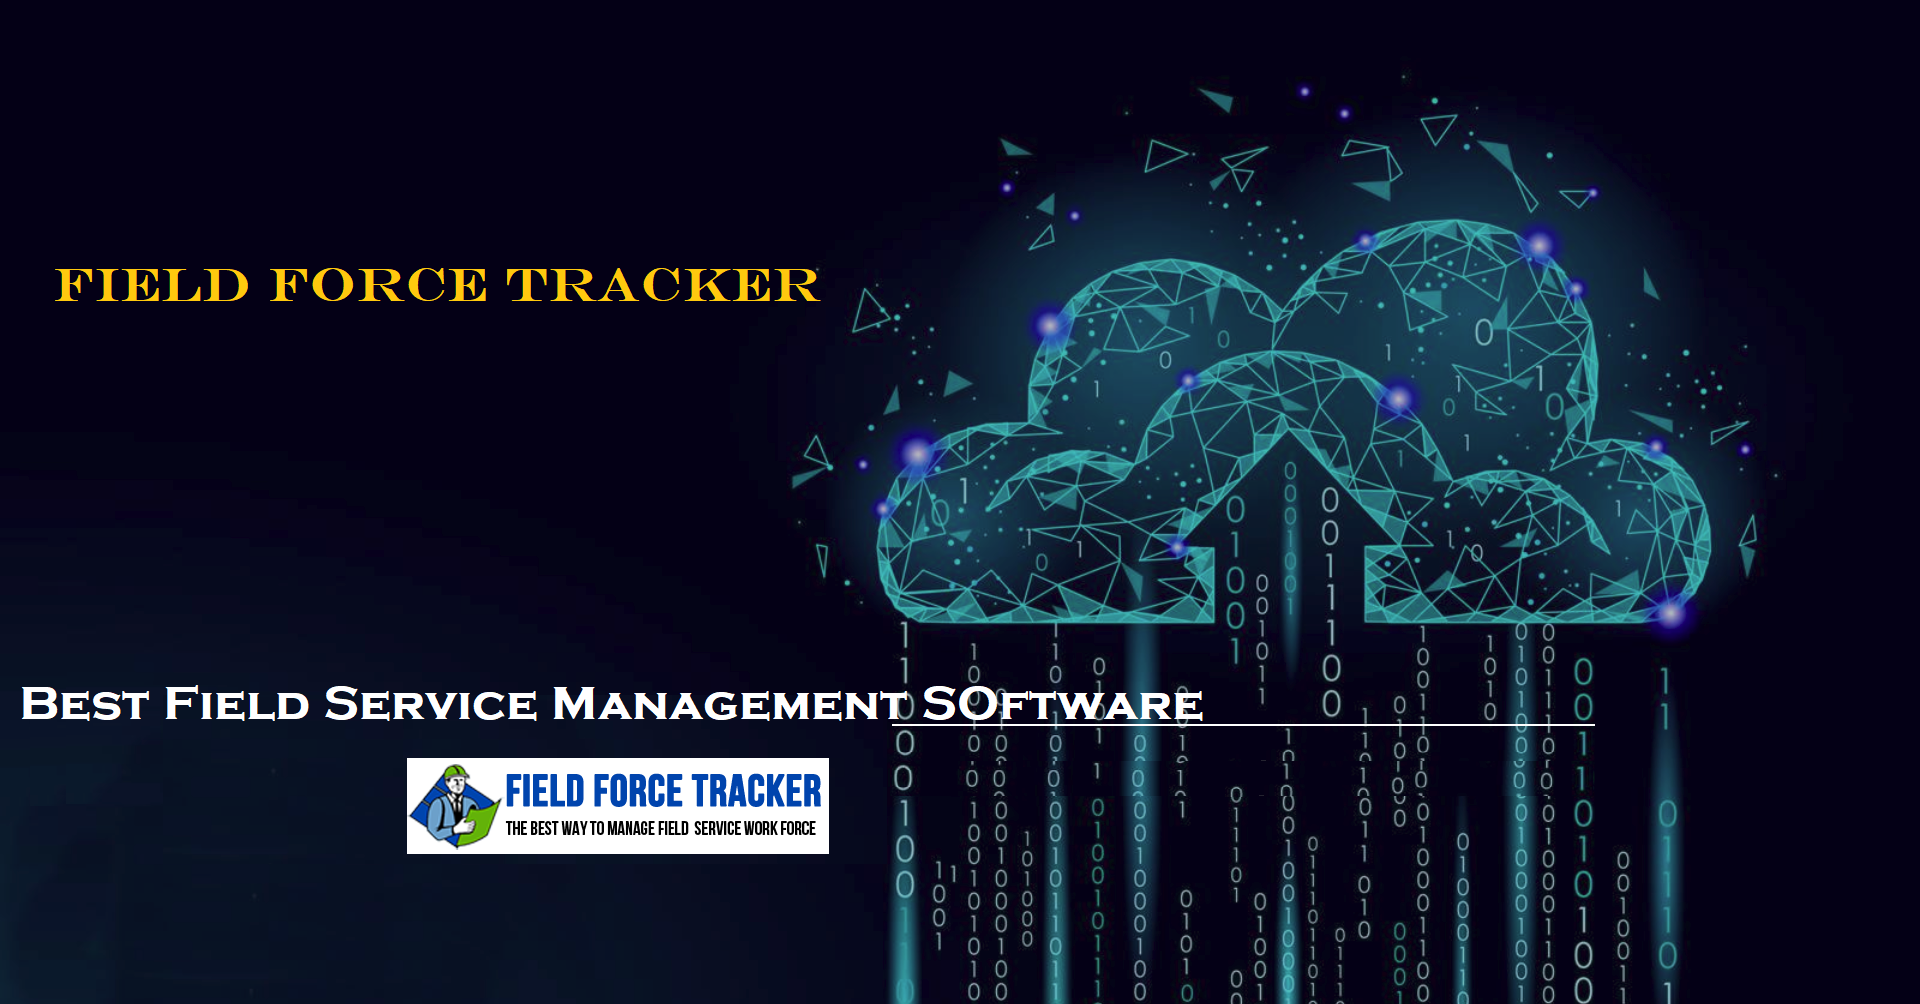 Best Field Service Management Software for small business